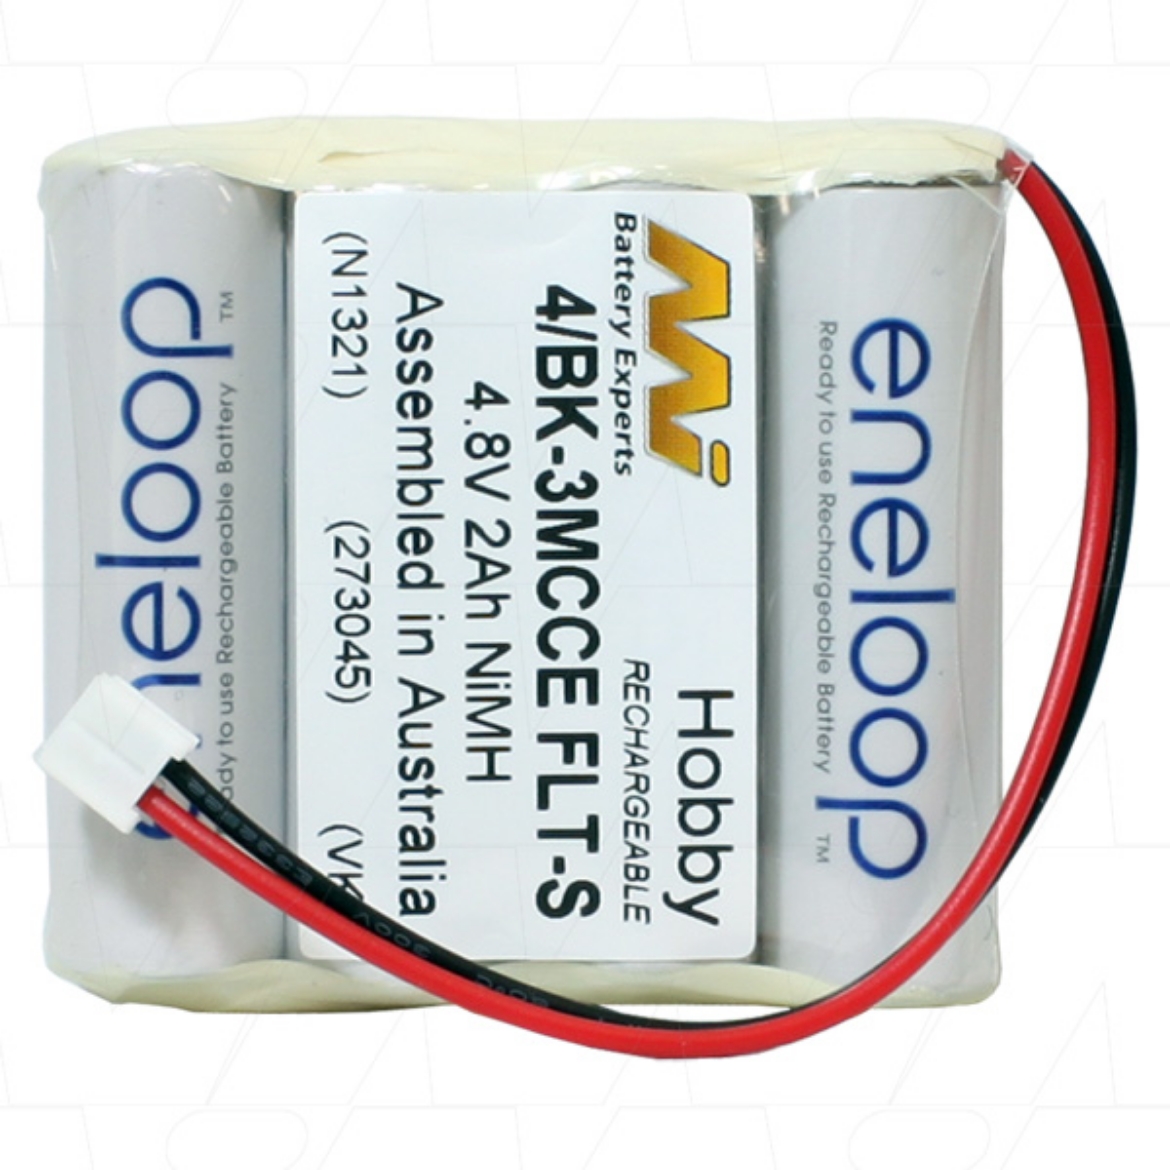 Picture of 4/BK-3MCCE FLT-S ENELOOP NiMh AA 4.8V 2000mAh R/C HOBBY BATTERY PACK WITH JST TYPE CONNECTOR -- (READY TO USE)